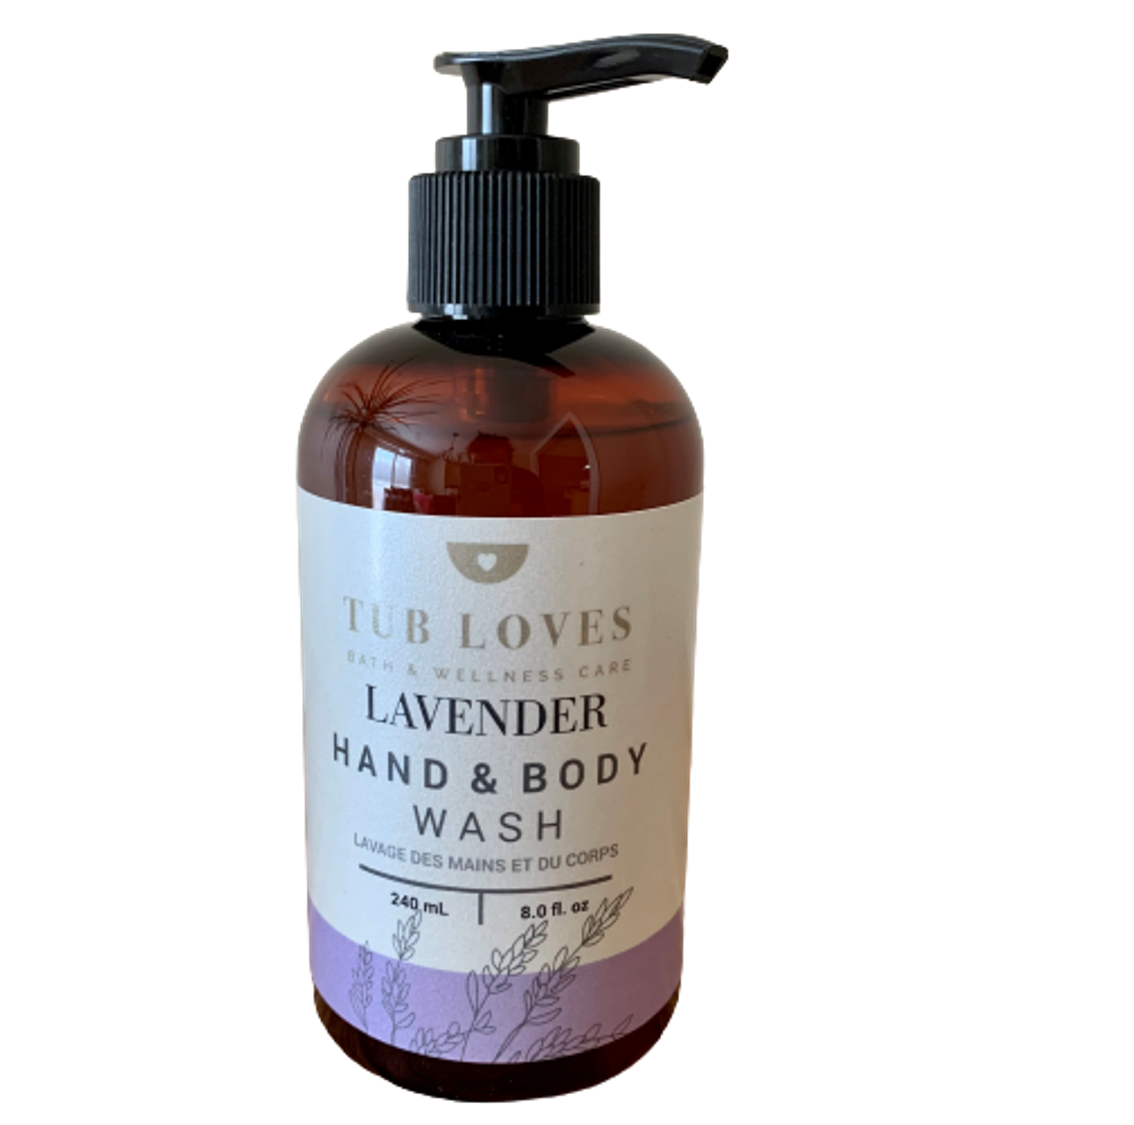 Lavender - Hand and Body Wash - Tub Loves